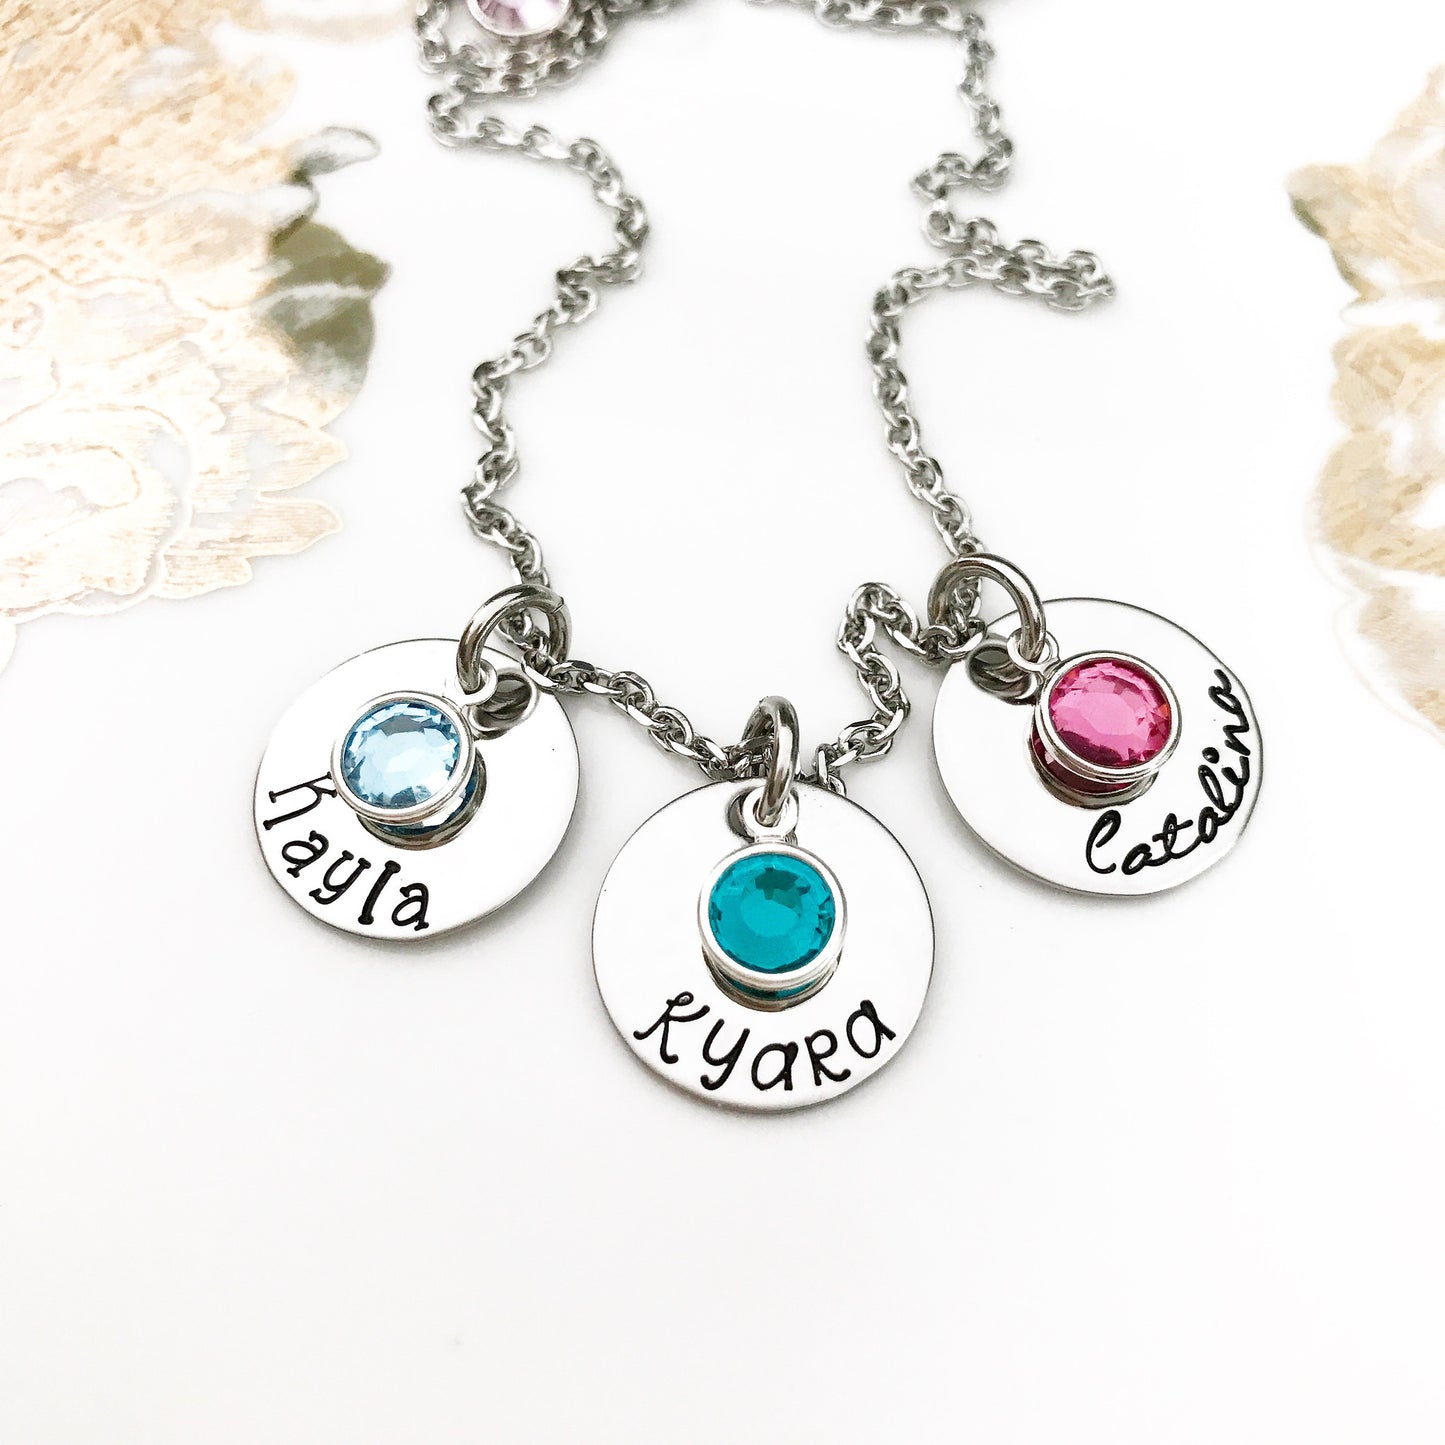 SIMPLE DISK or HEART*NECKLACE*BANGLE